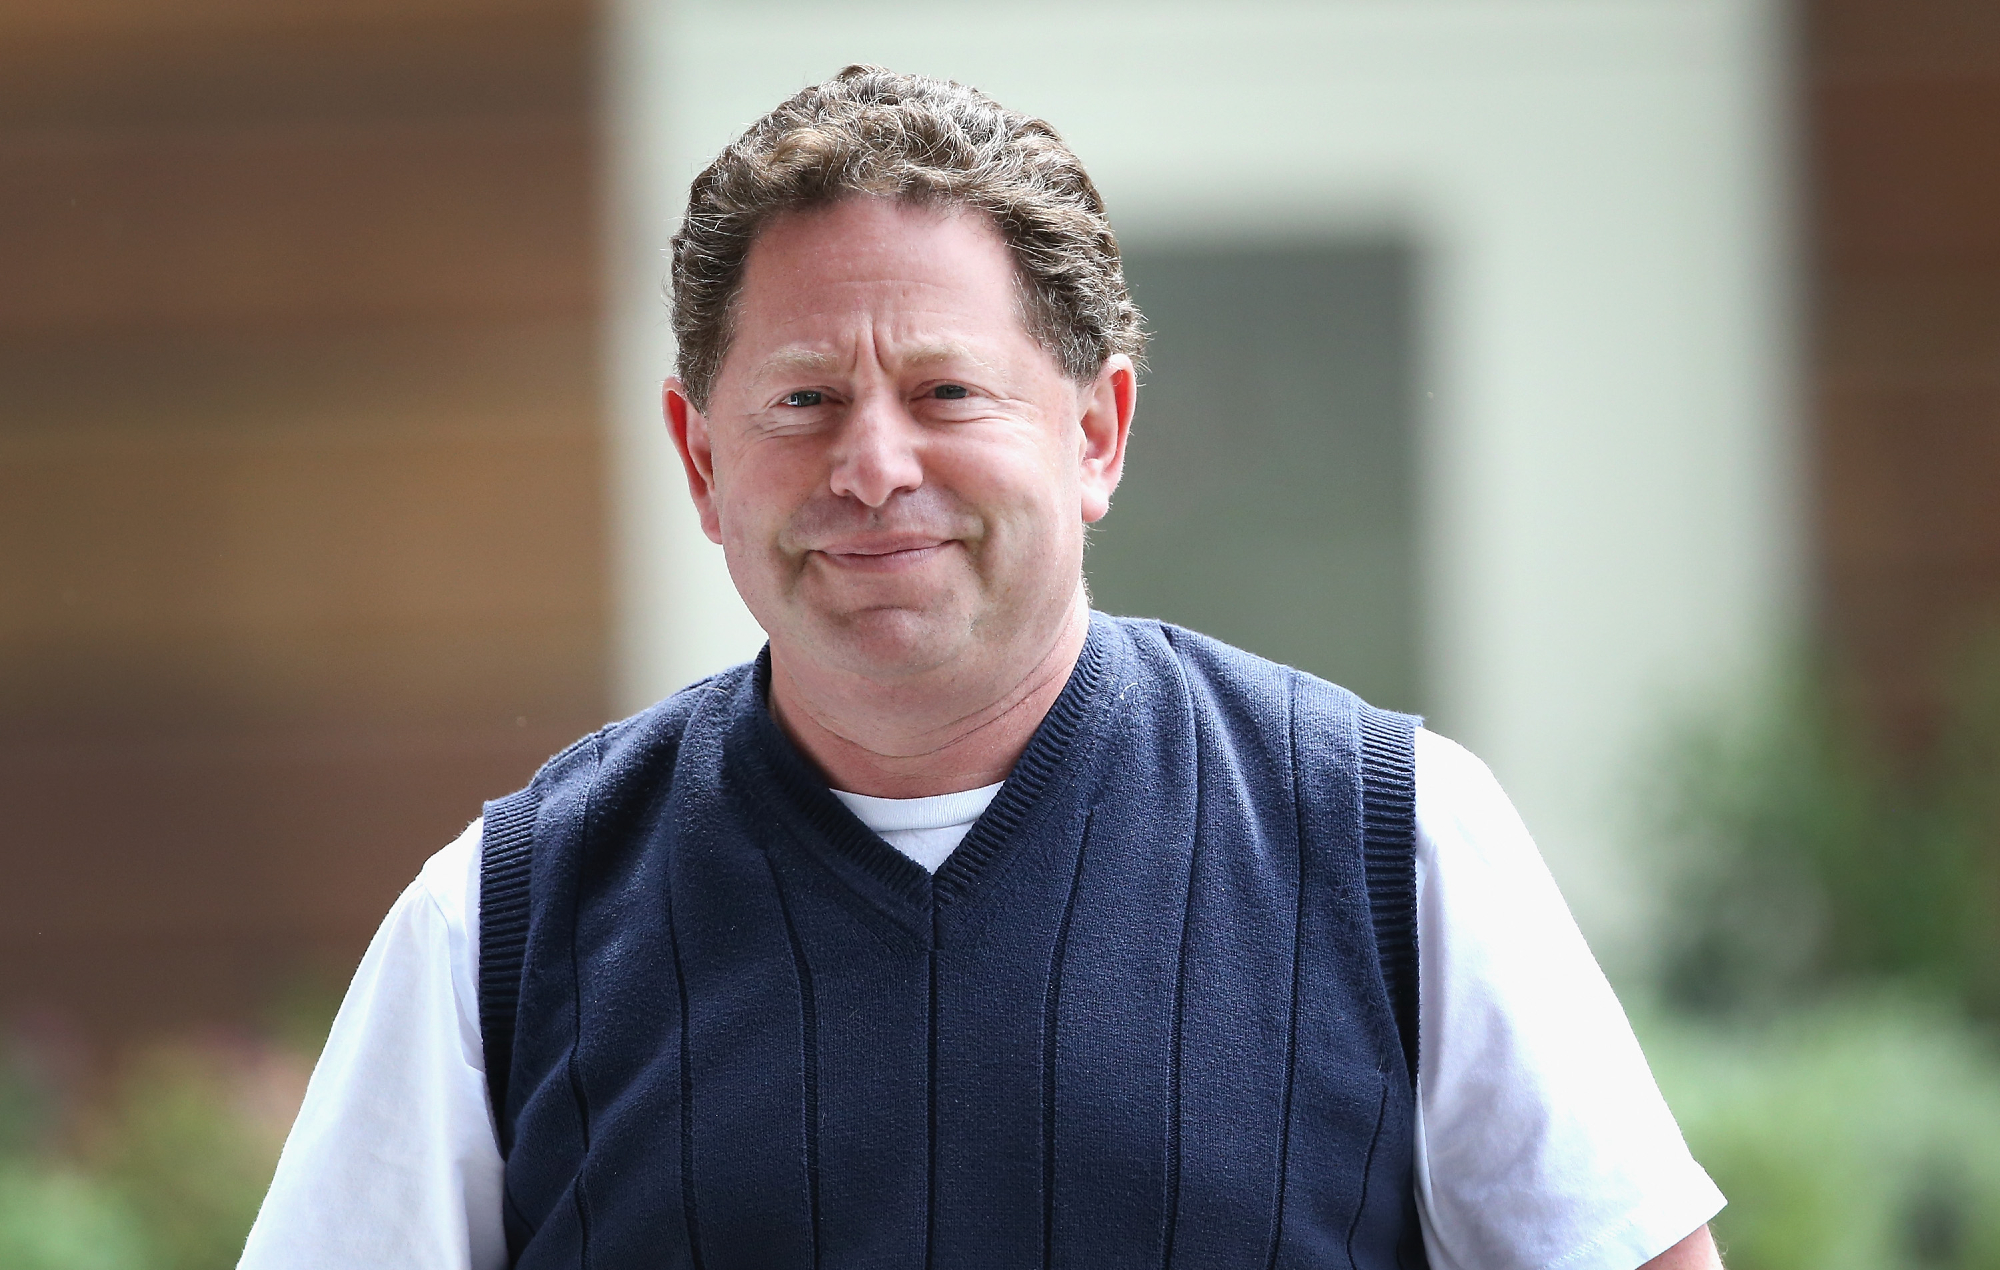 Bobby Kotick is still the CEO of Activision Blizzard, for now